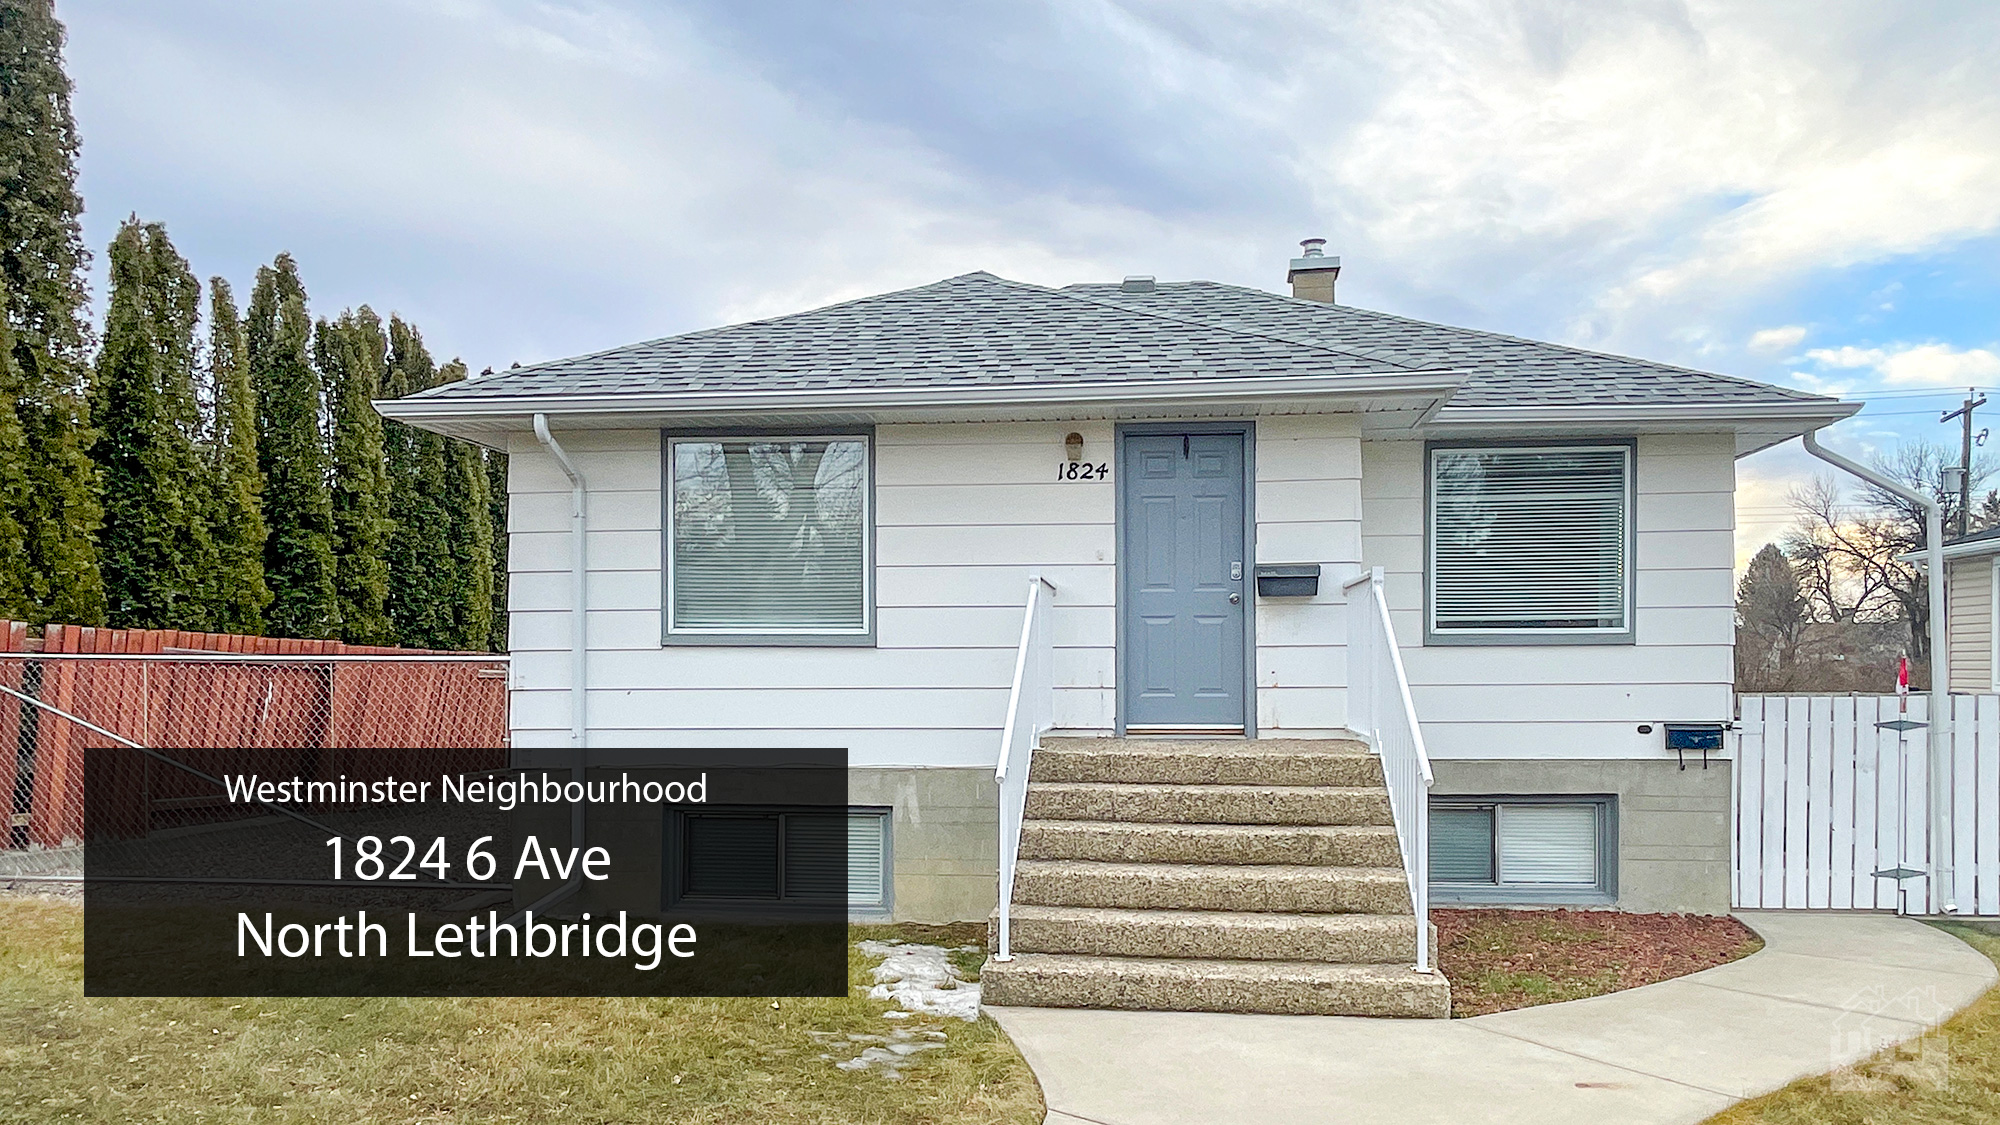 1824 6 Ave North Lethbridge (Lower Suite) Cover image